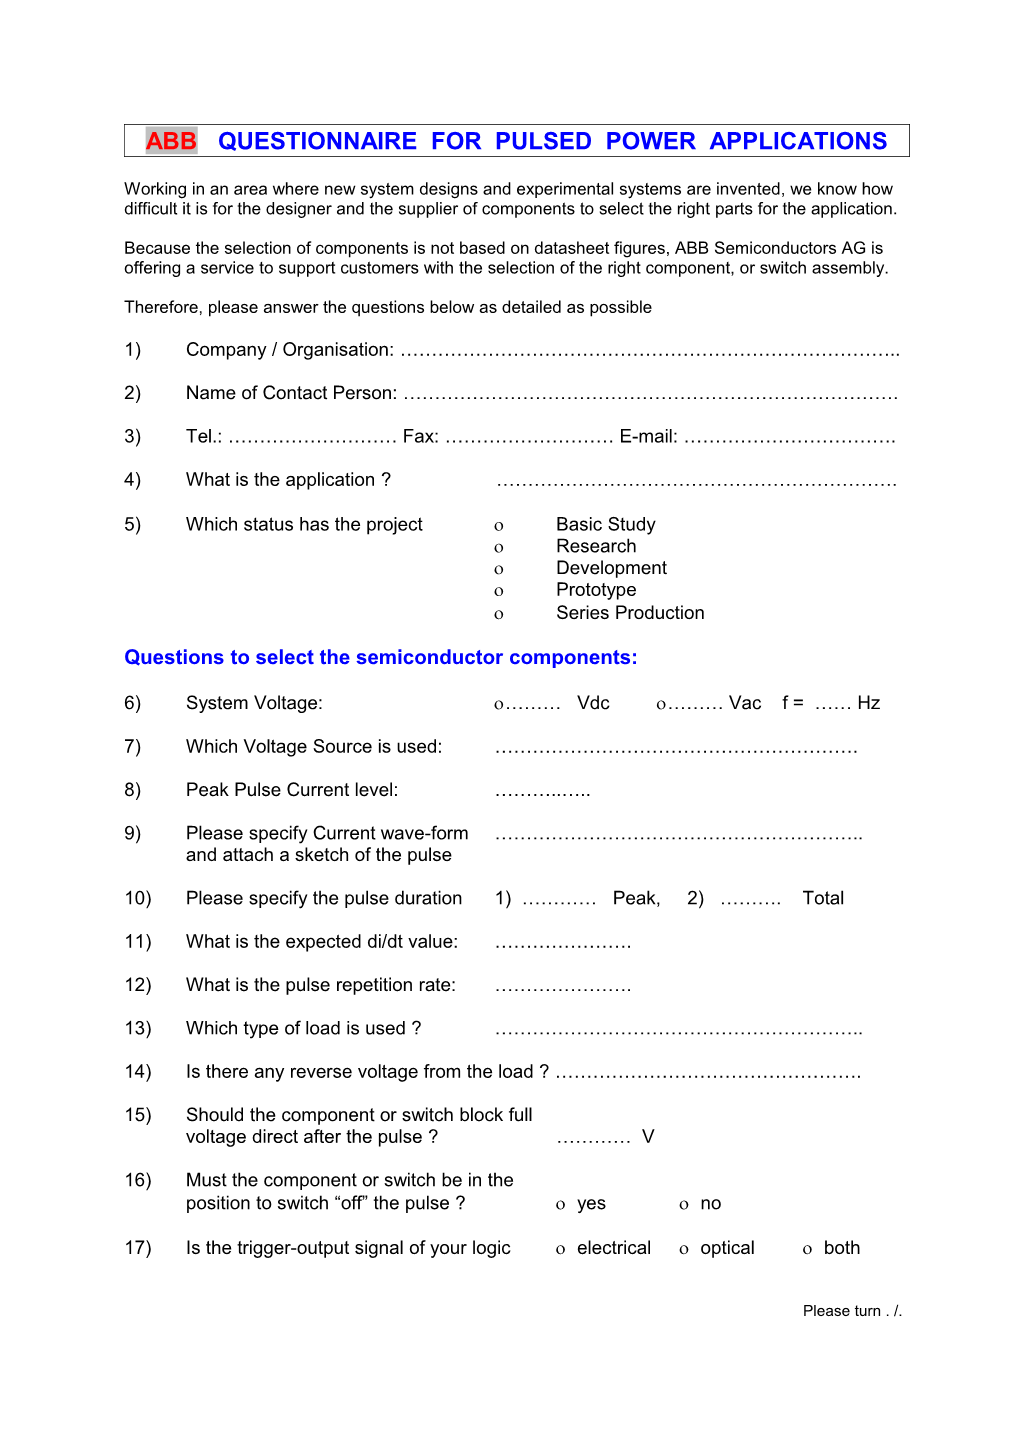 Questionnaire for Pulsed Power Applications